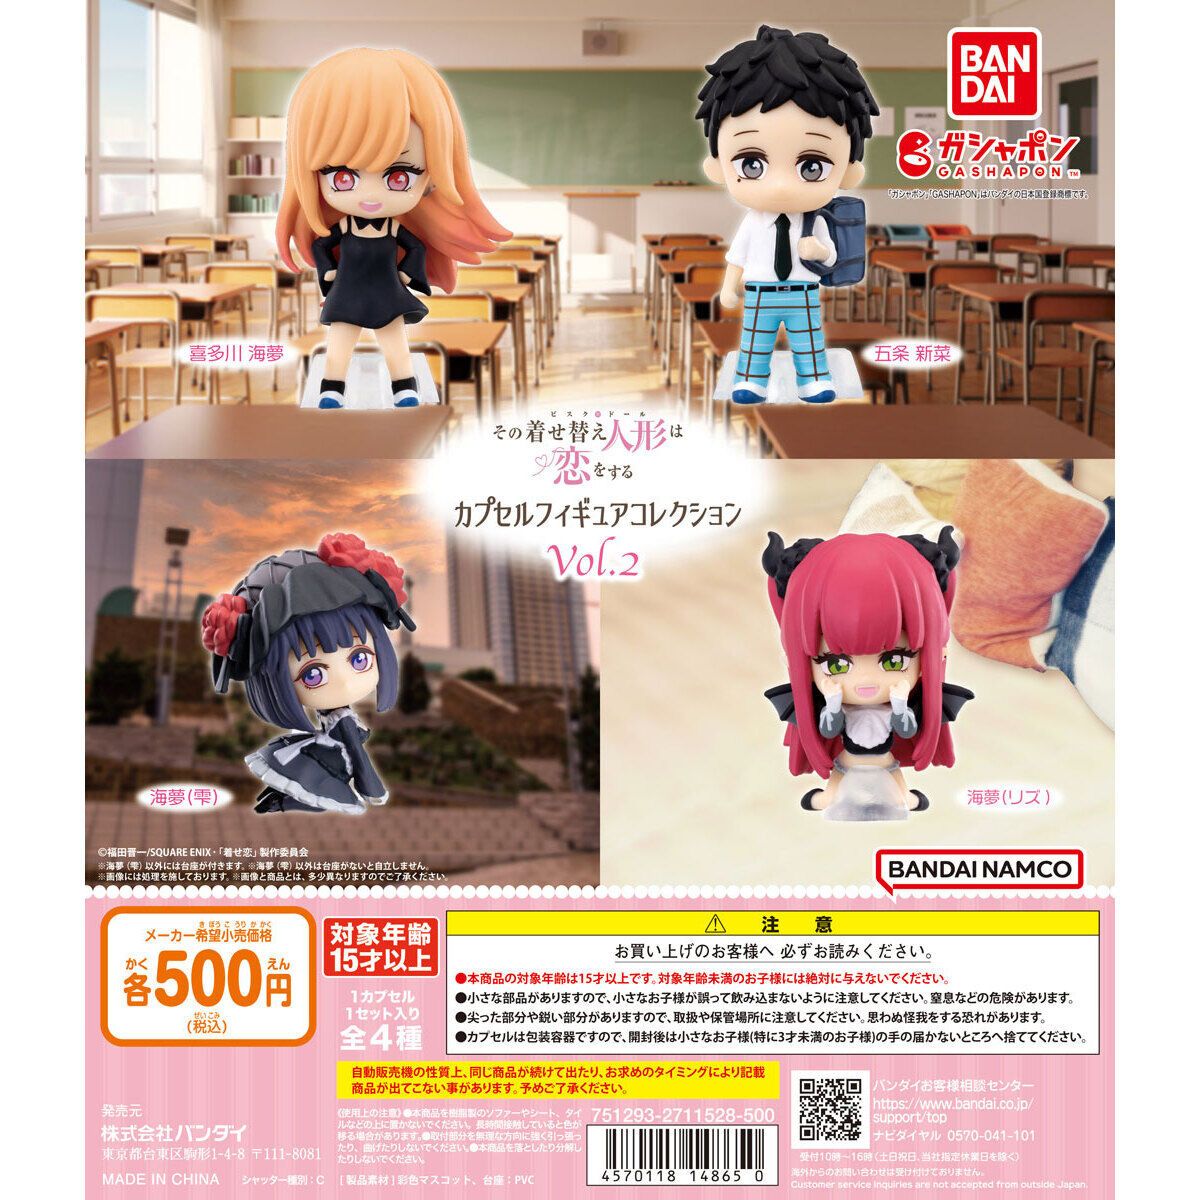 My Dress-Up Darling's New Anime Gachapon Toys Feature Four of Its Characters in Chibi Form